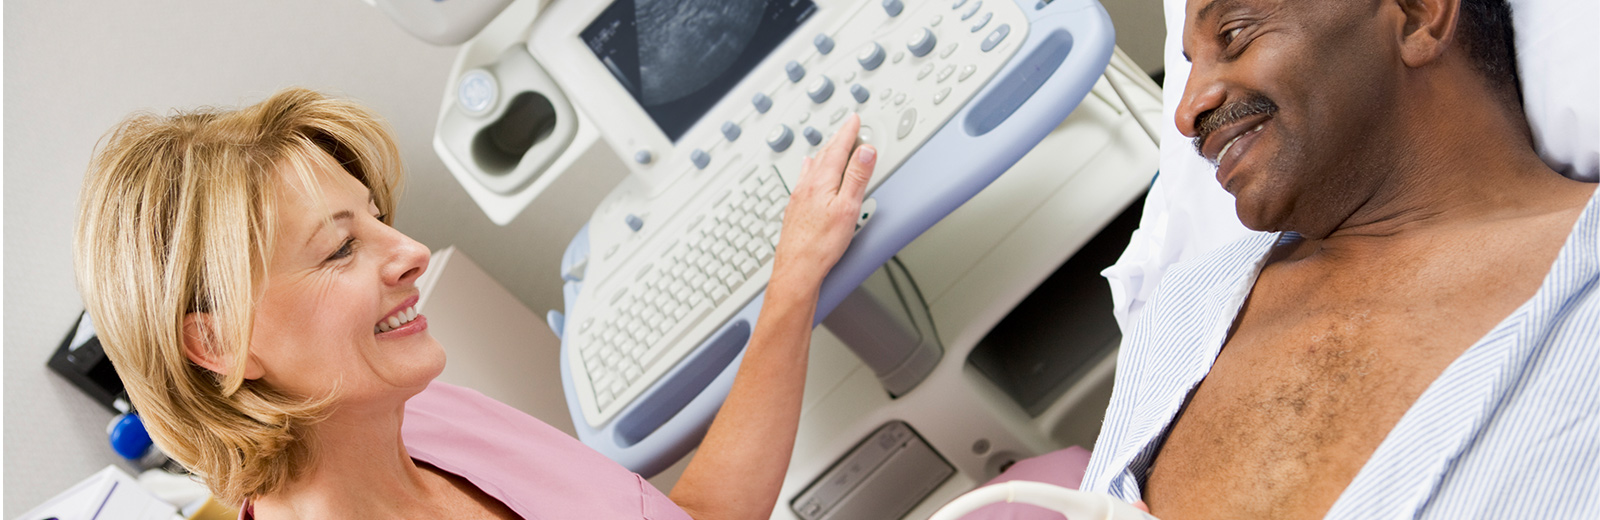 Program: Diagnostic Medical Sonography, Associate of Applied Science -  Central New Mexico Community College - Acalog ACMS™